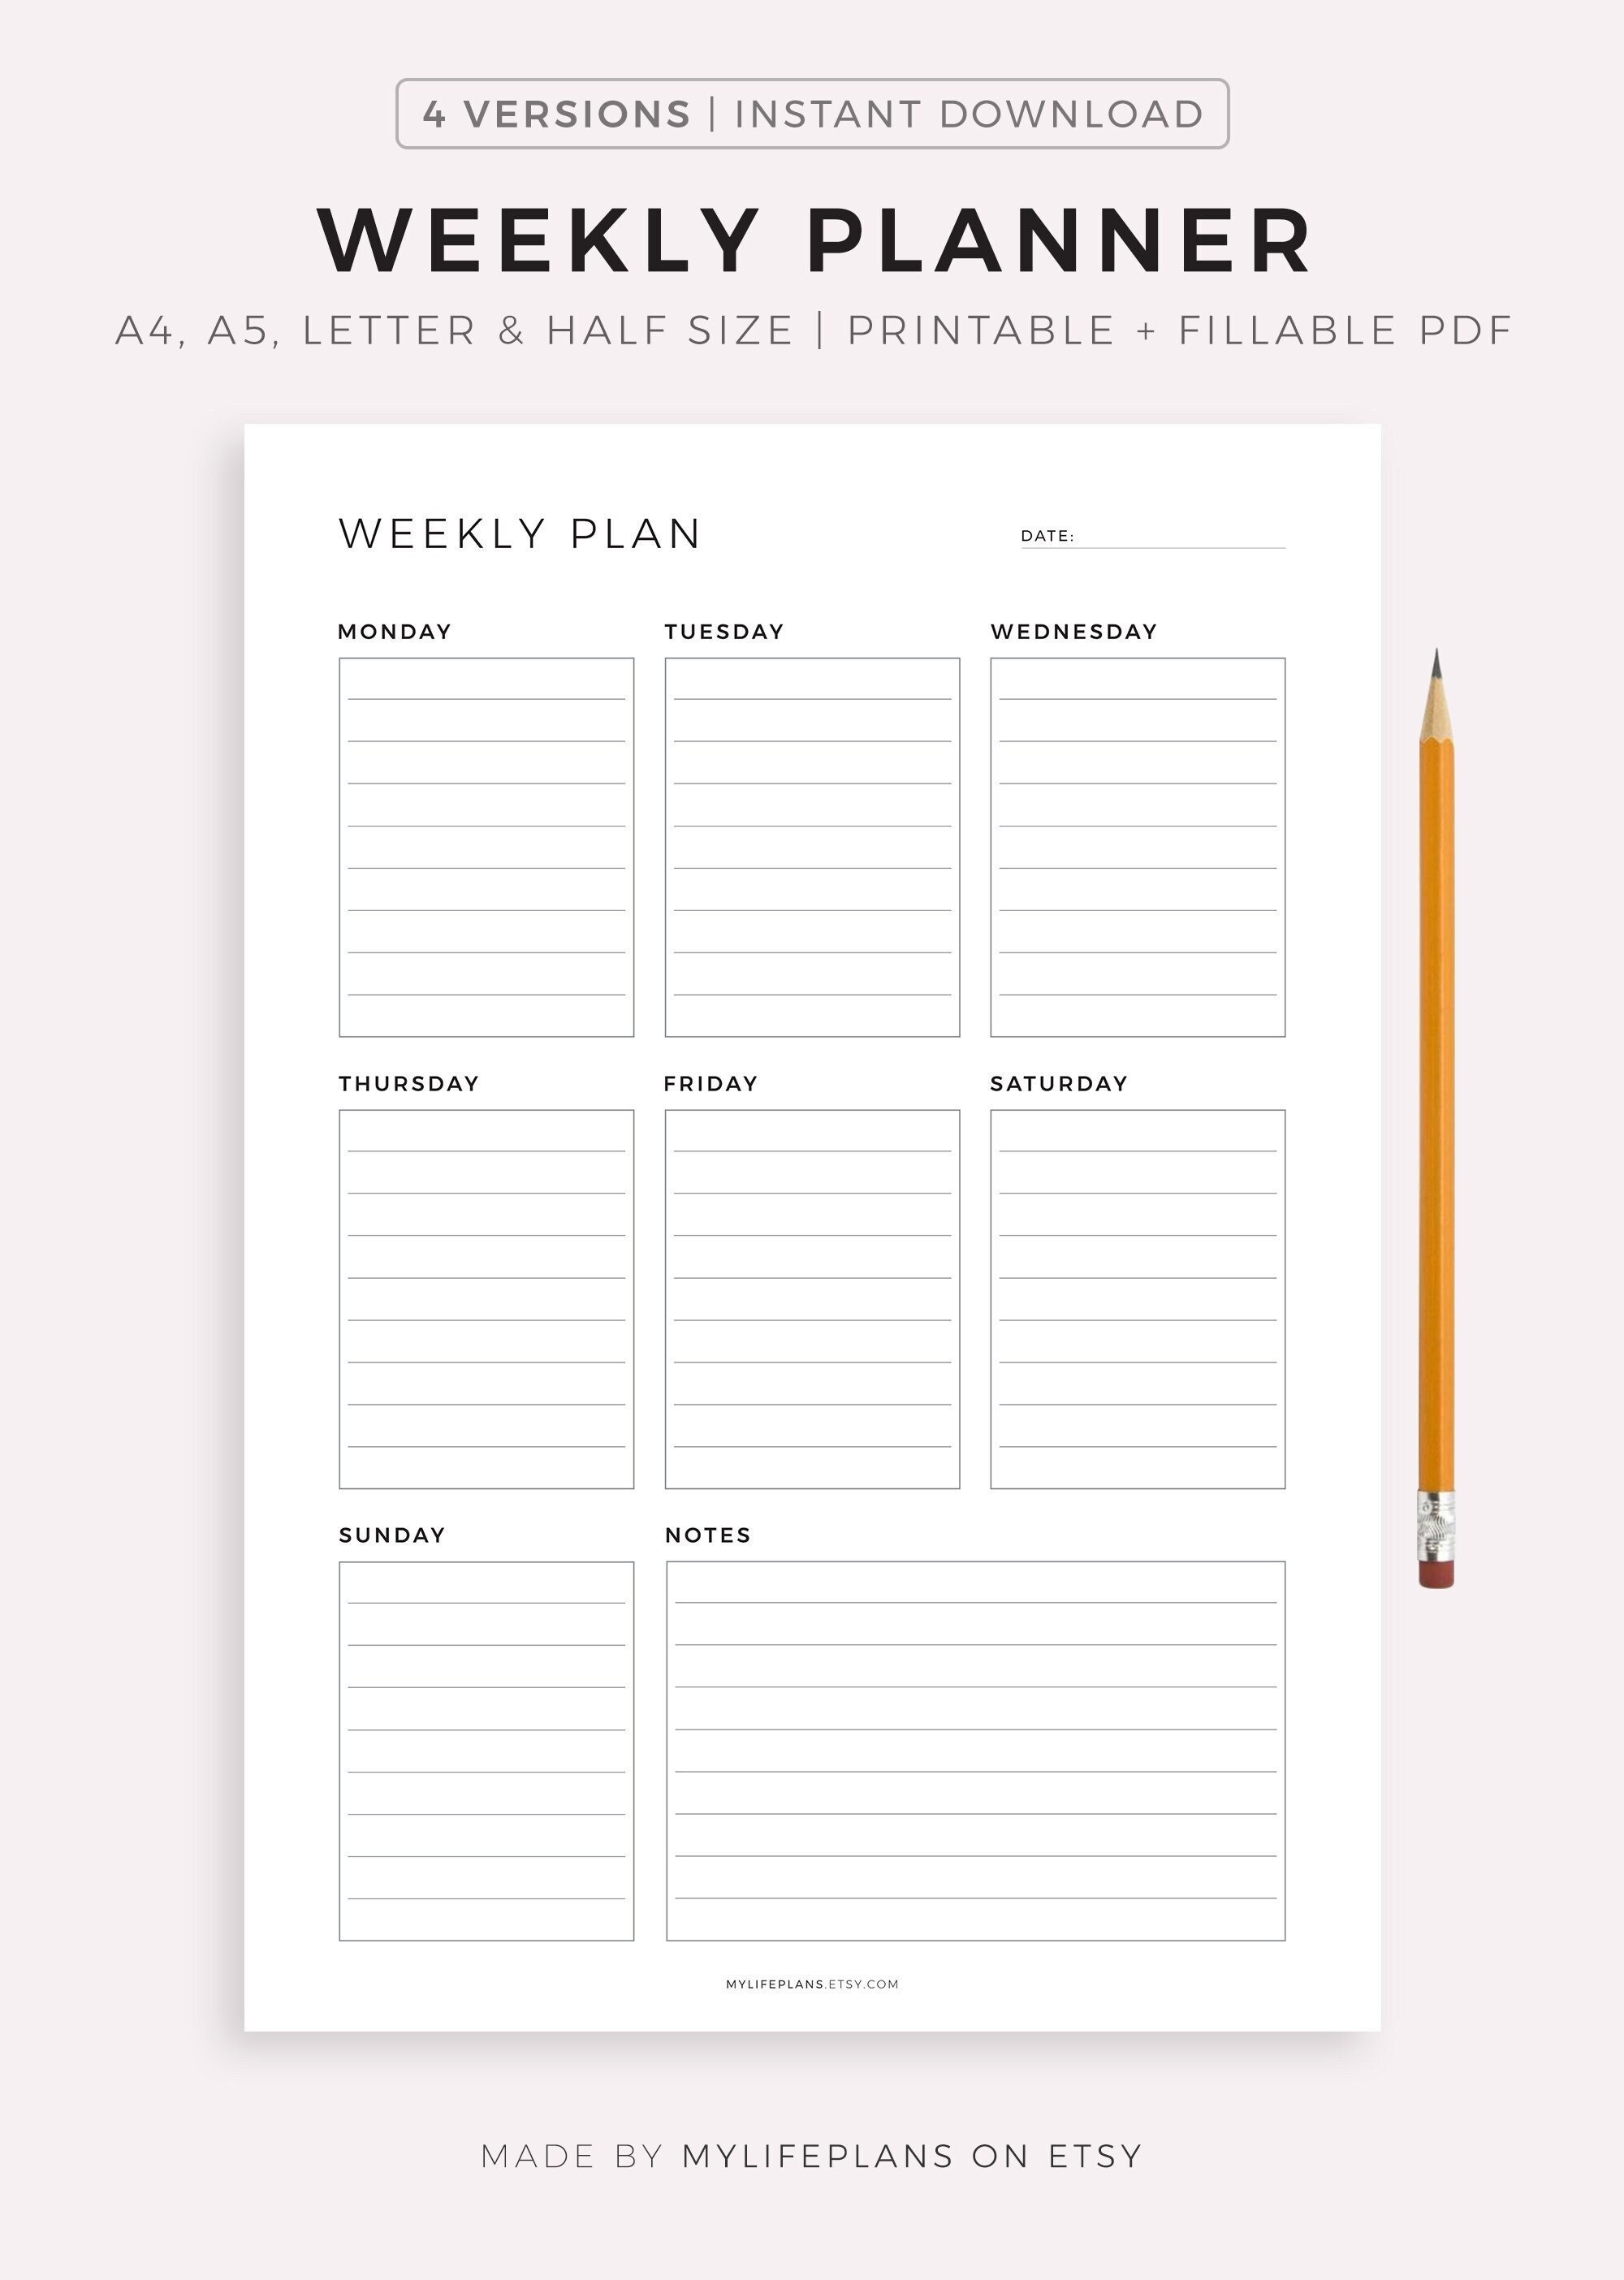 Weekly Planner Printable to Do List, Minimal Weekly Schedule, Weekly  Organizer Journal, Weekly Agenda, Week at a Glance, A4/a5/letter/half 